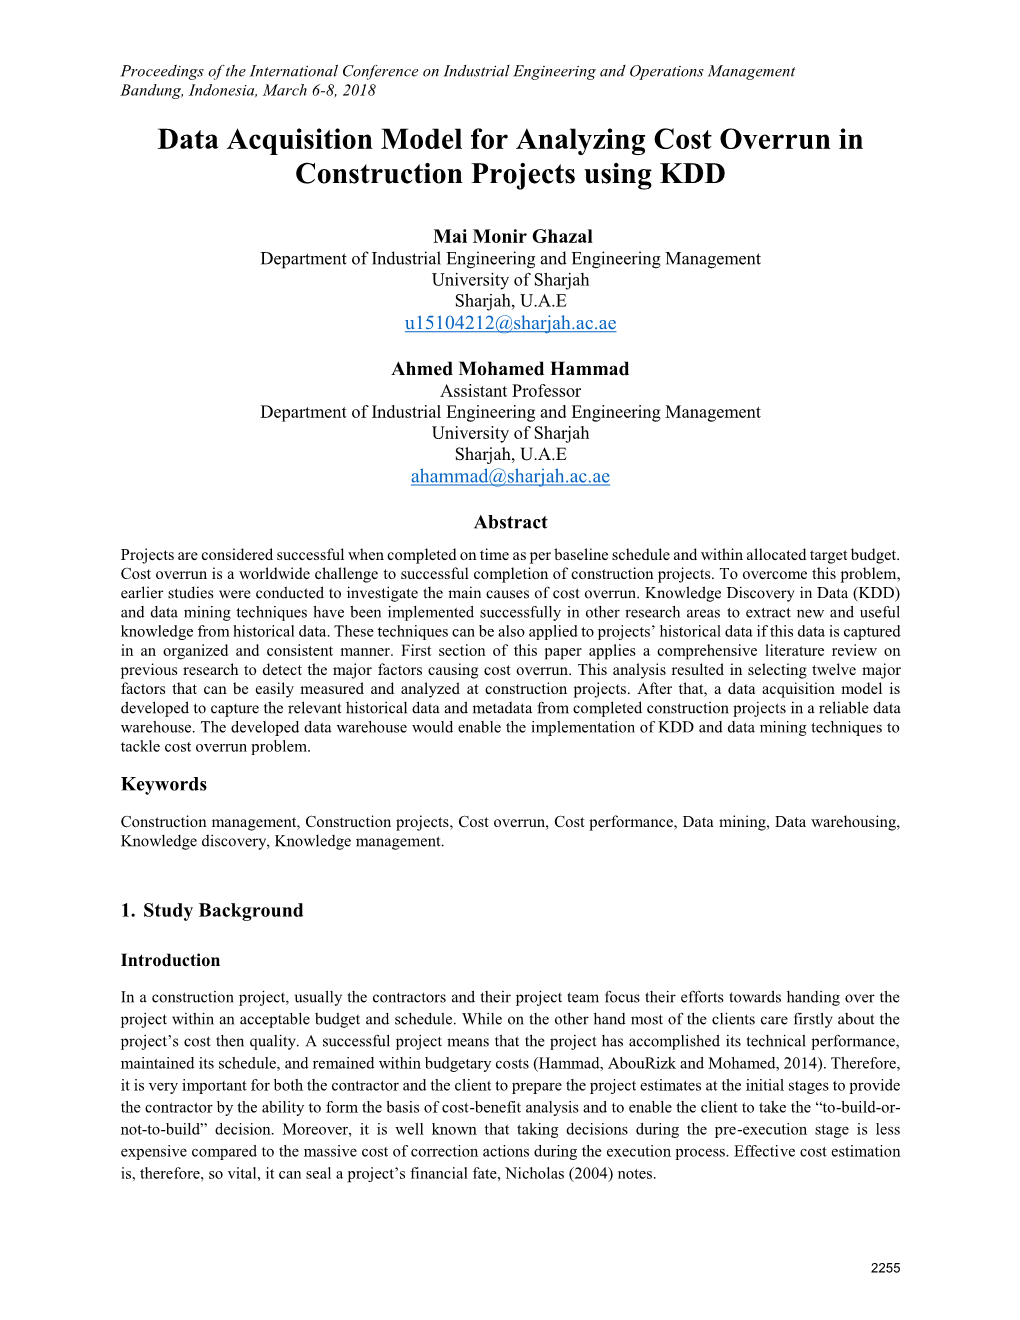 Data Acquisition Model for Analyzing Cost Overrun in Construction Projects Using KDD